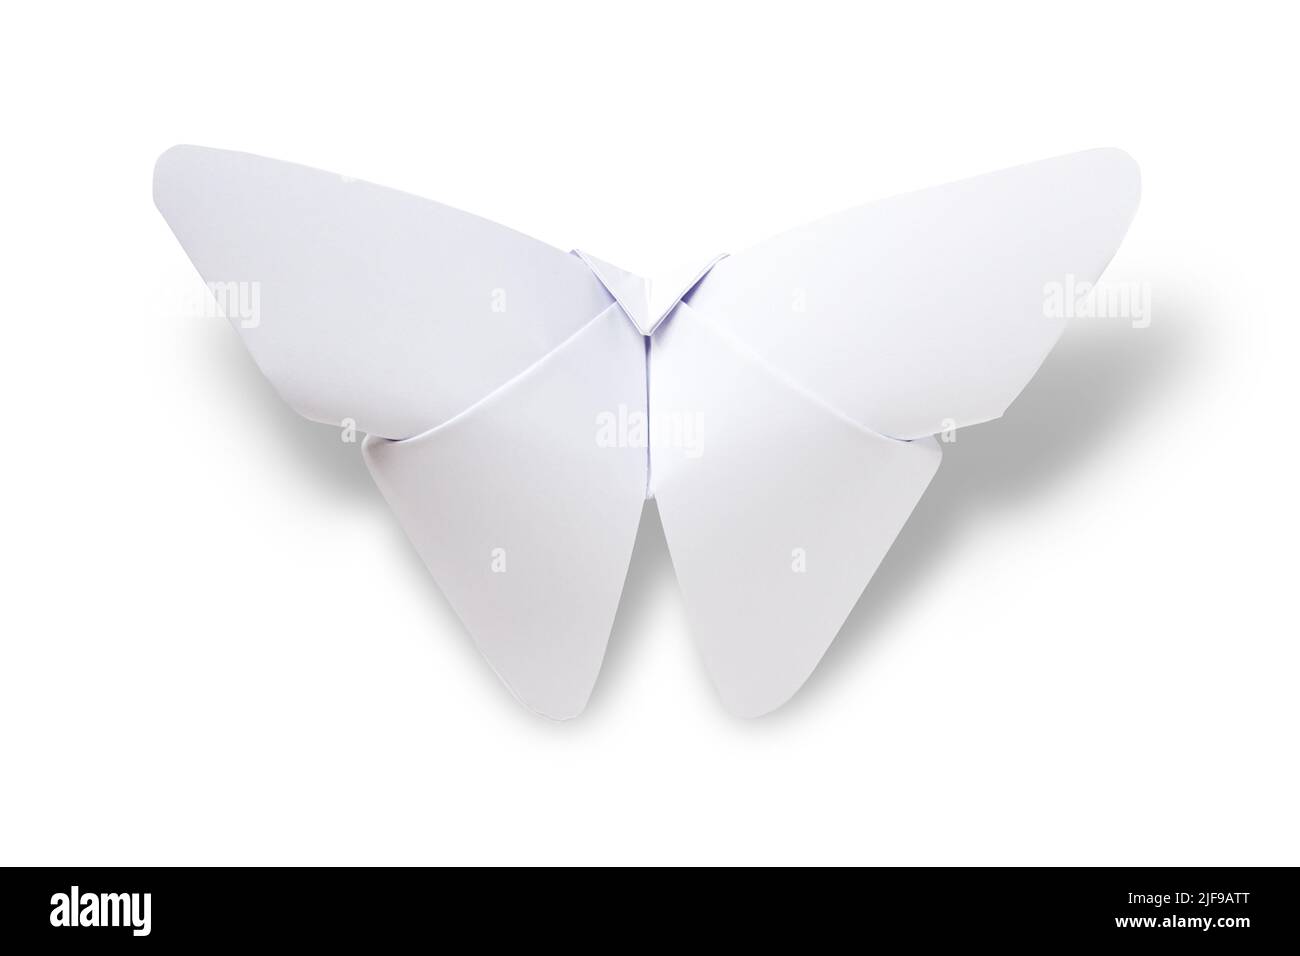 Paper butterfly origami isolated on a blank white background. Stock Photo